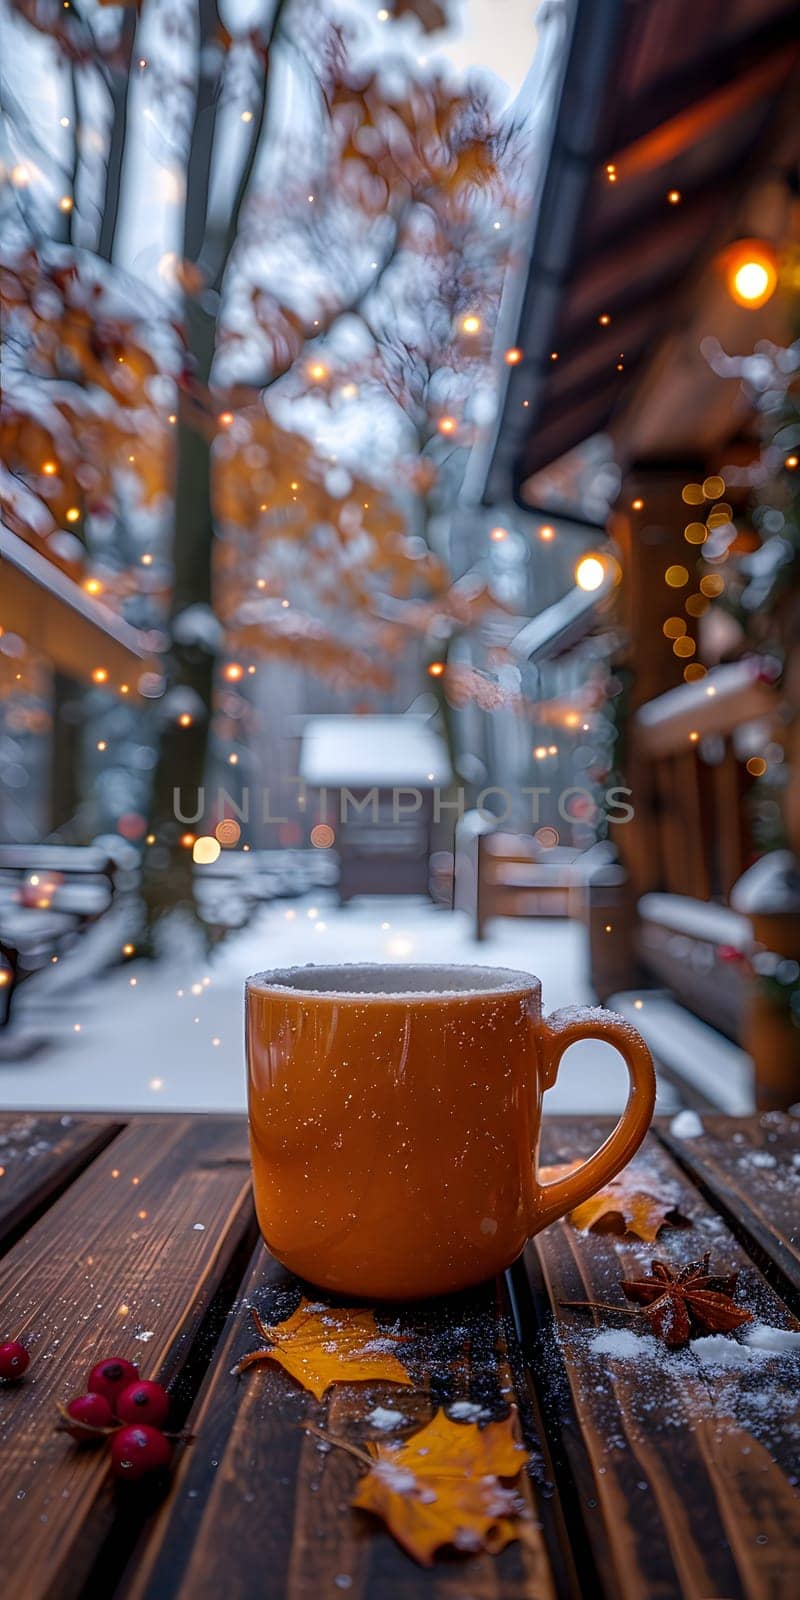 A coffee cup is placed on a wooden table, contrasting against the snowy background. The tableware provides a warm touch to the wintry scene